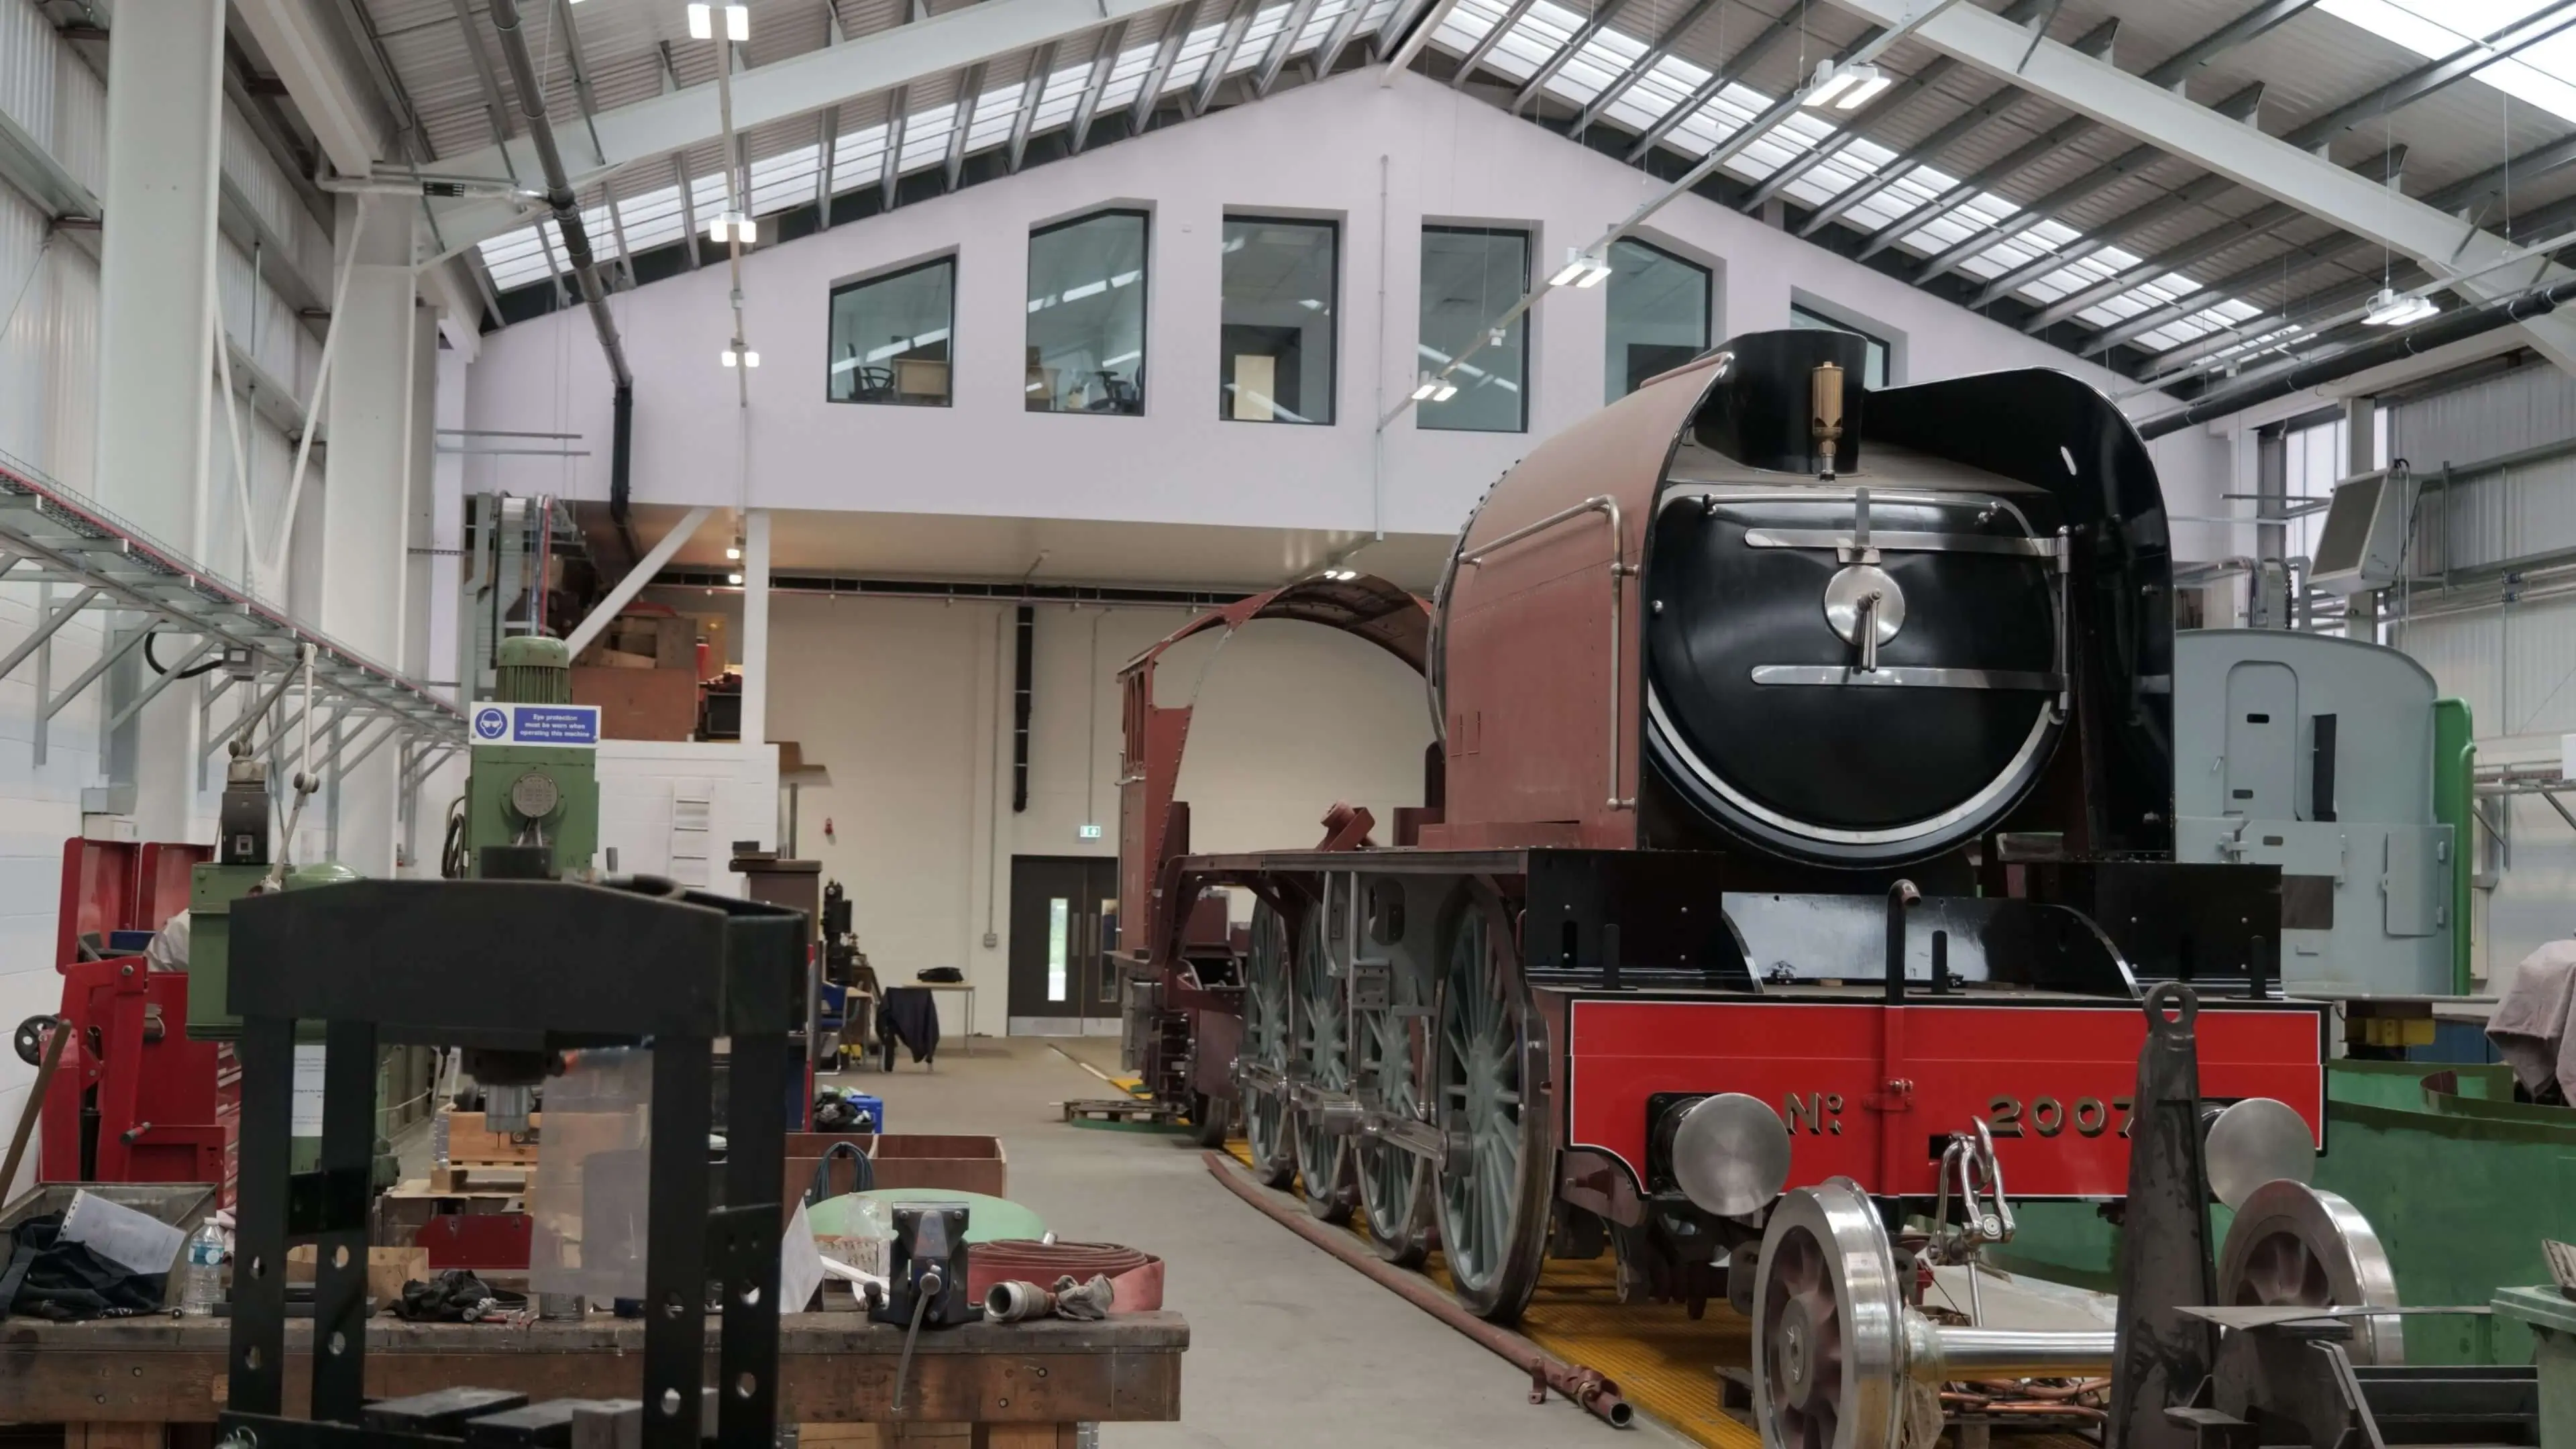 Construction of the new P2 class locomotive Prince of Wales